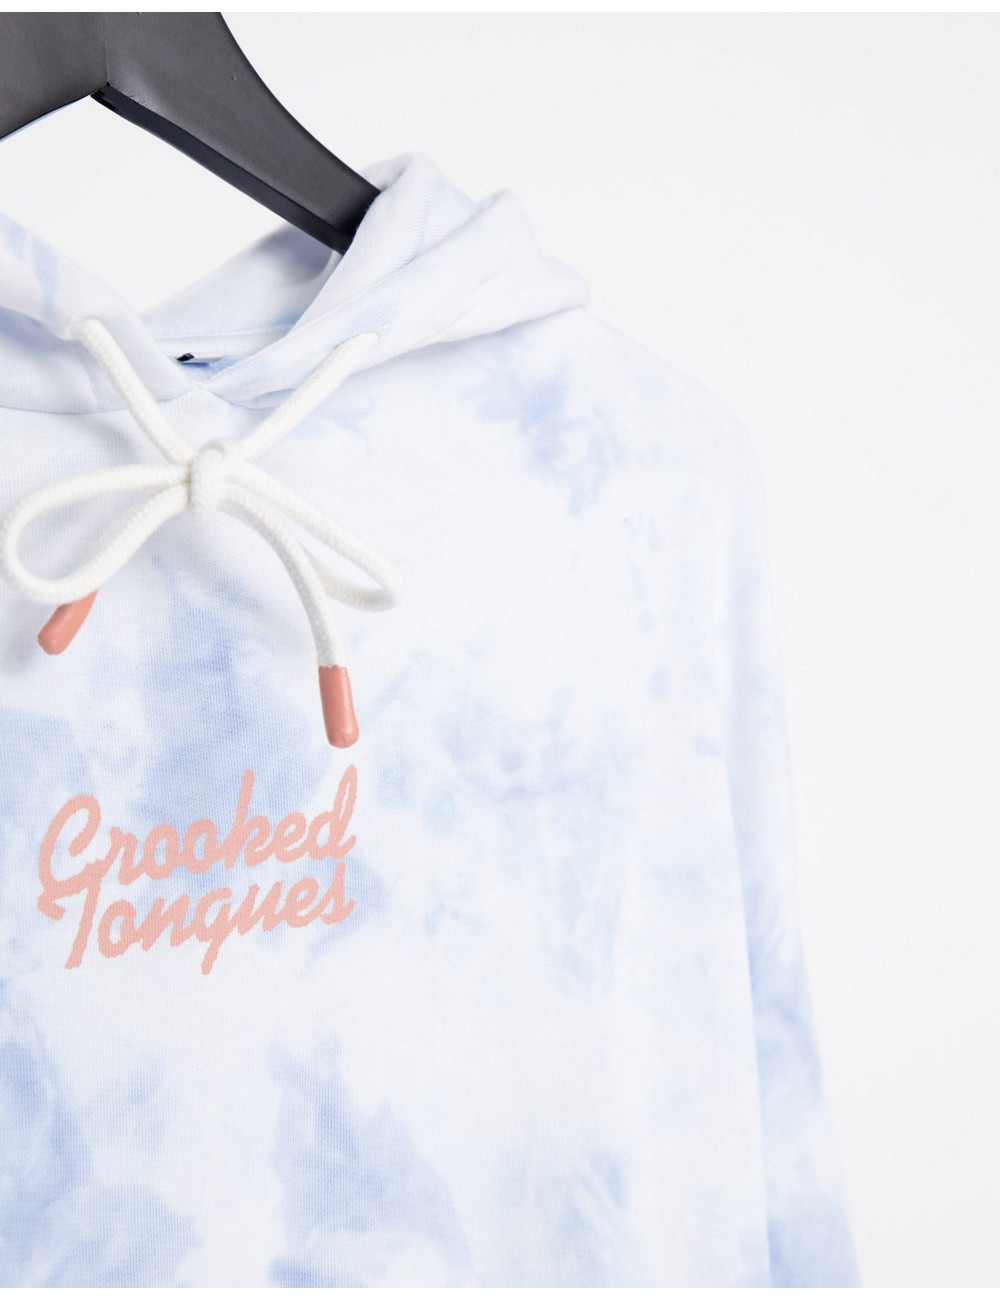 Crooked tongues co-ord...